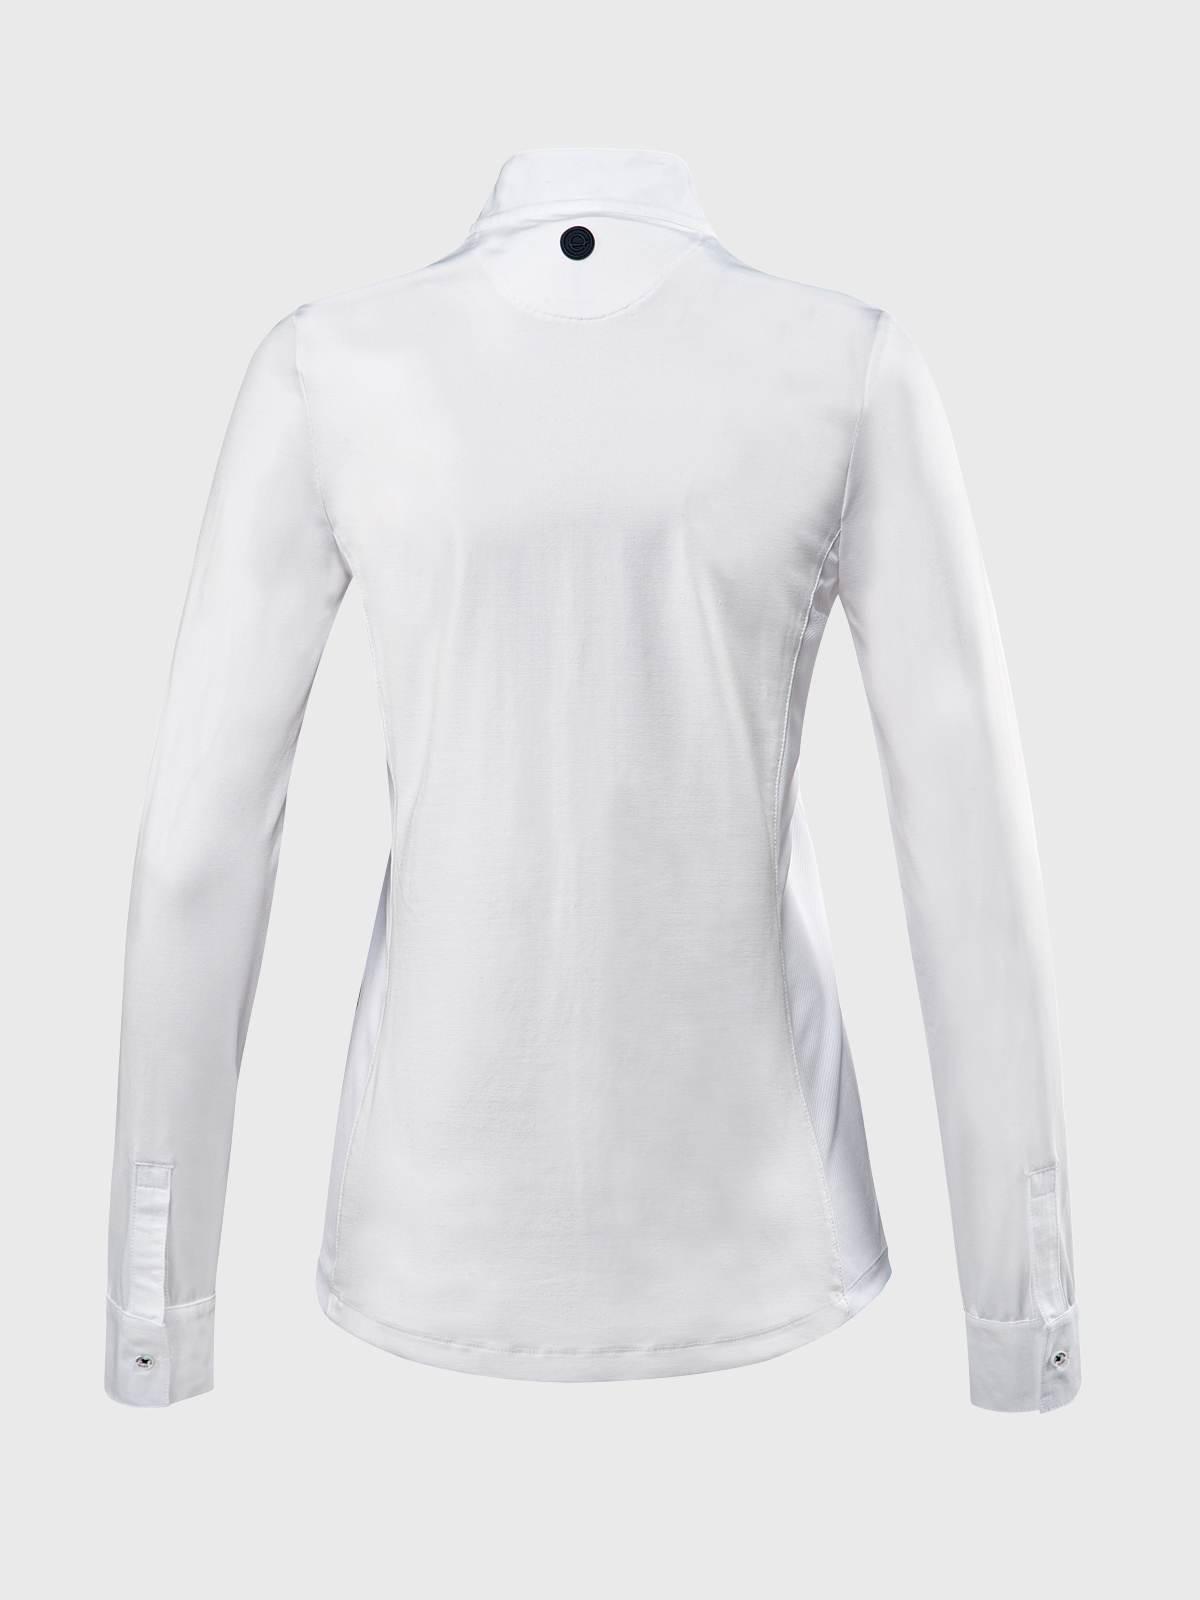 EQODE WOMEN'S SHOW SHIRT WITH LONG SLEEVES 2